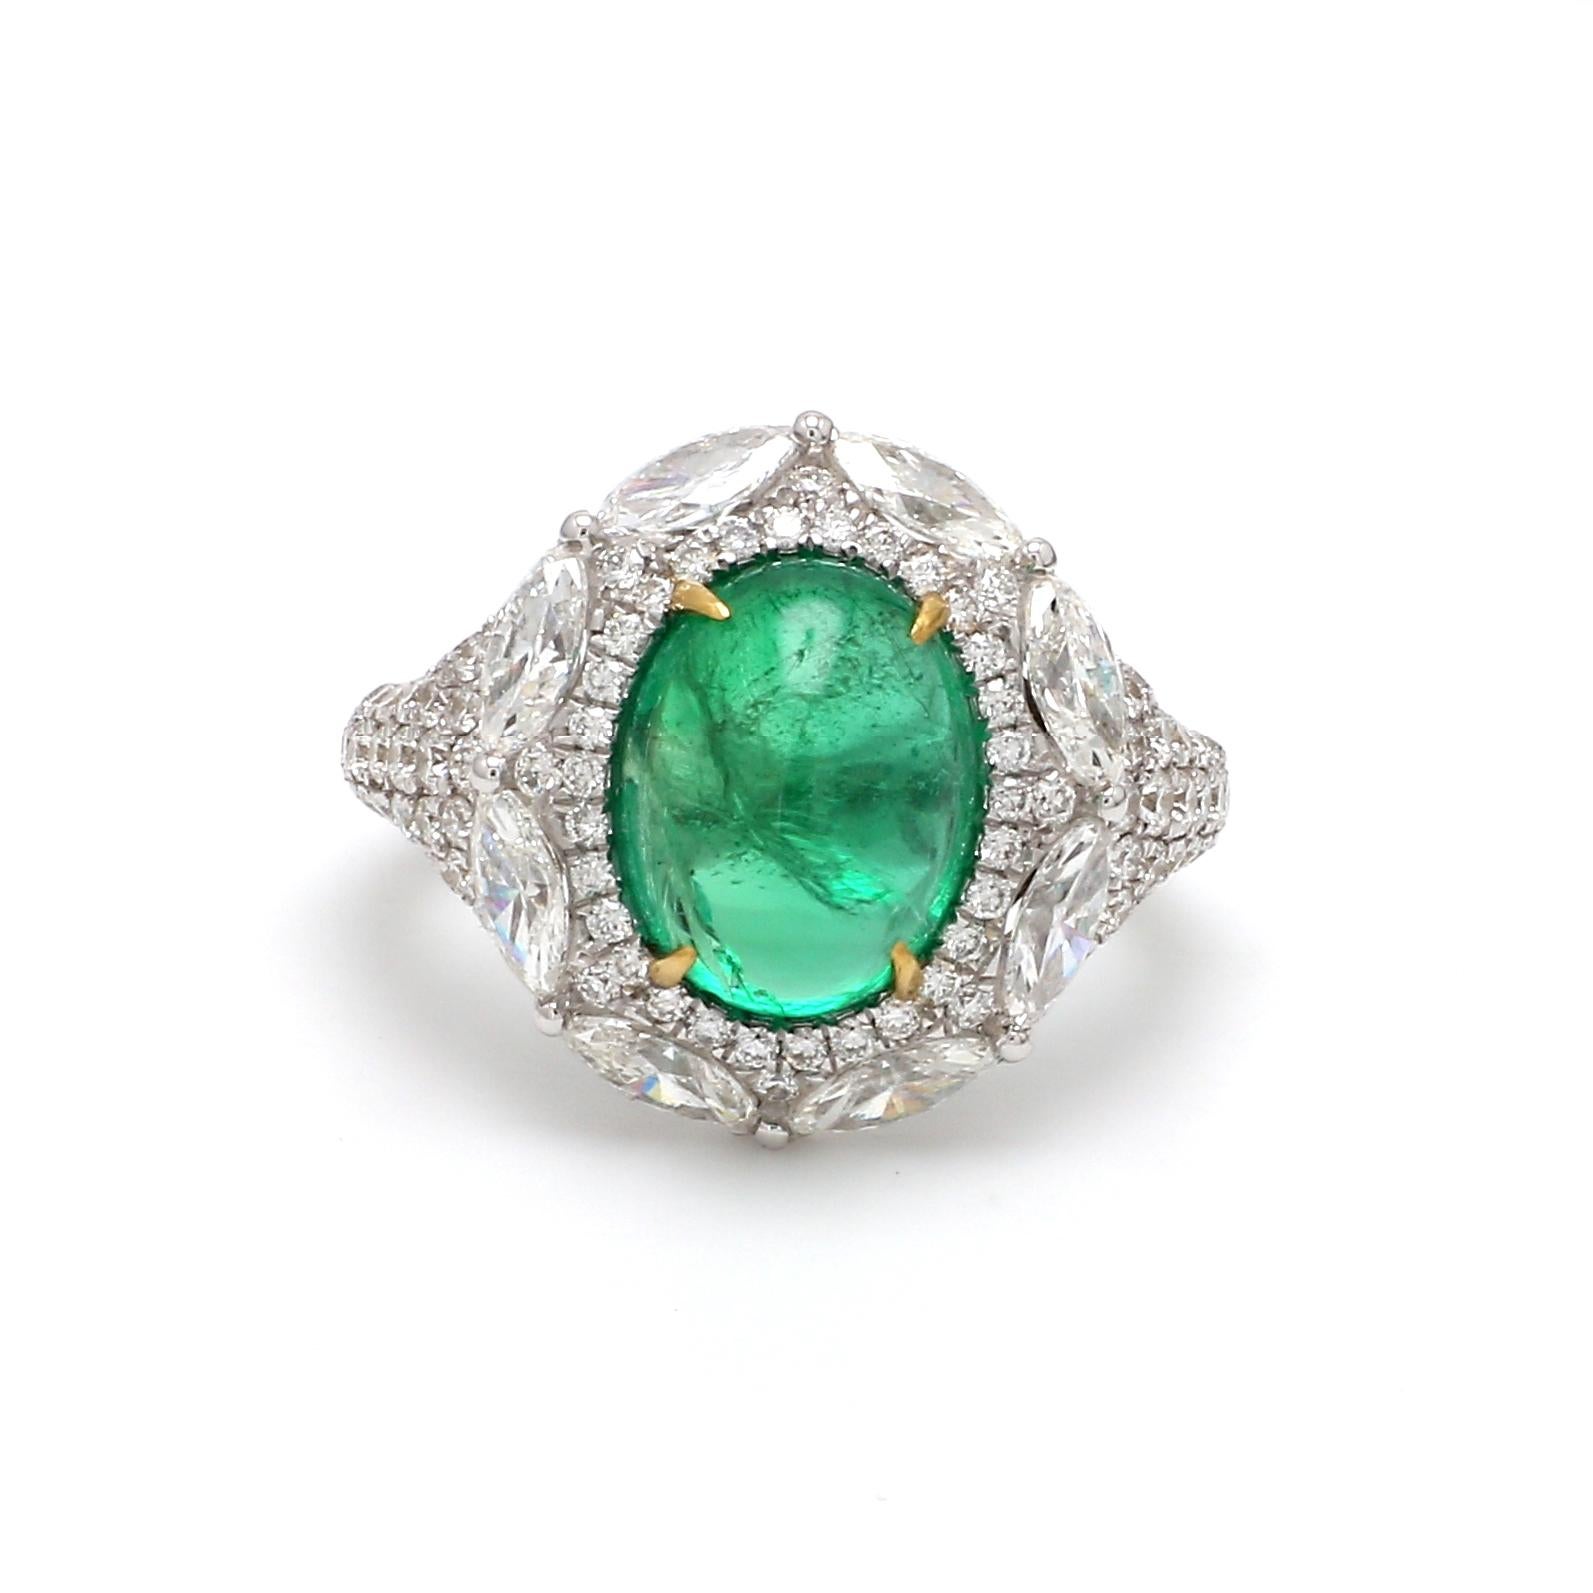 A Beautiful Handcrafted Ring in 18 karat Gold with Natural Emerald of Zambian origin and Brilliant Cut Colorless Diamonds Cocktail Ring totaling 2.80 Carat Diamond and 1 Piece Emerald 3.89 Carat.

Emerald Details
Weight: 3.89 carats
Natural Emerald